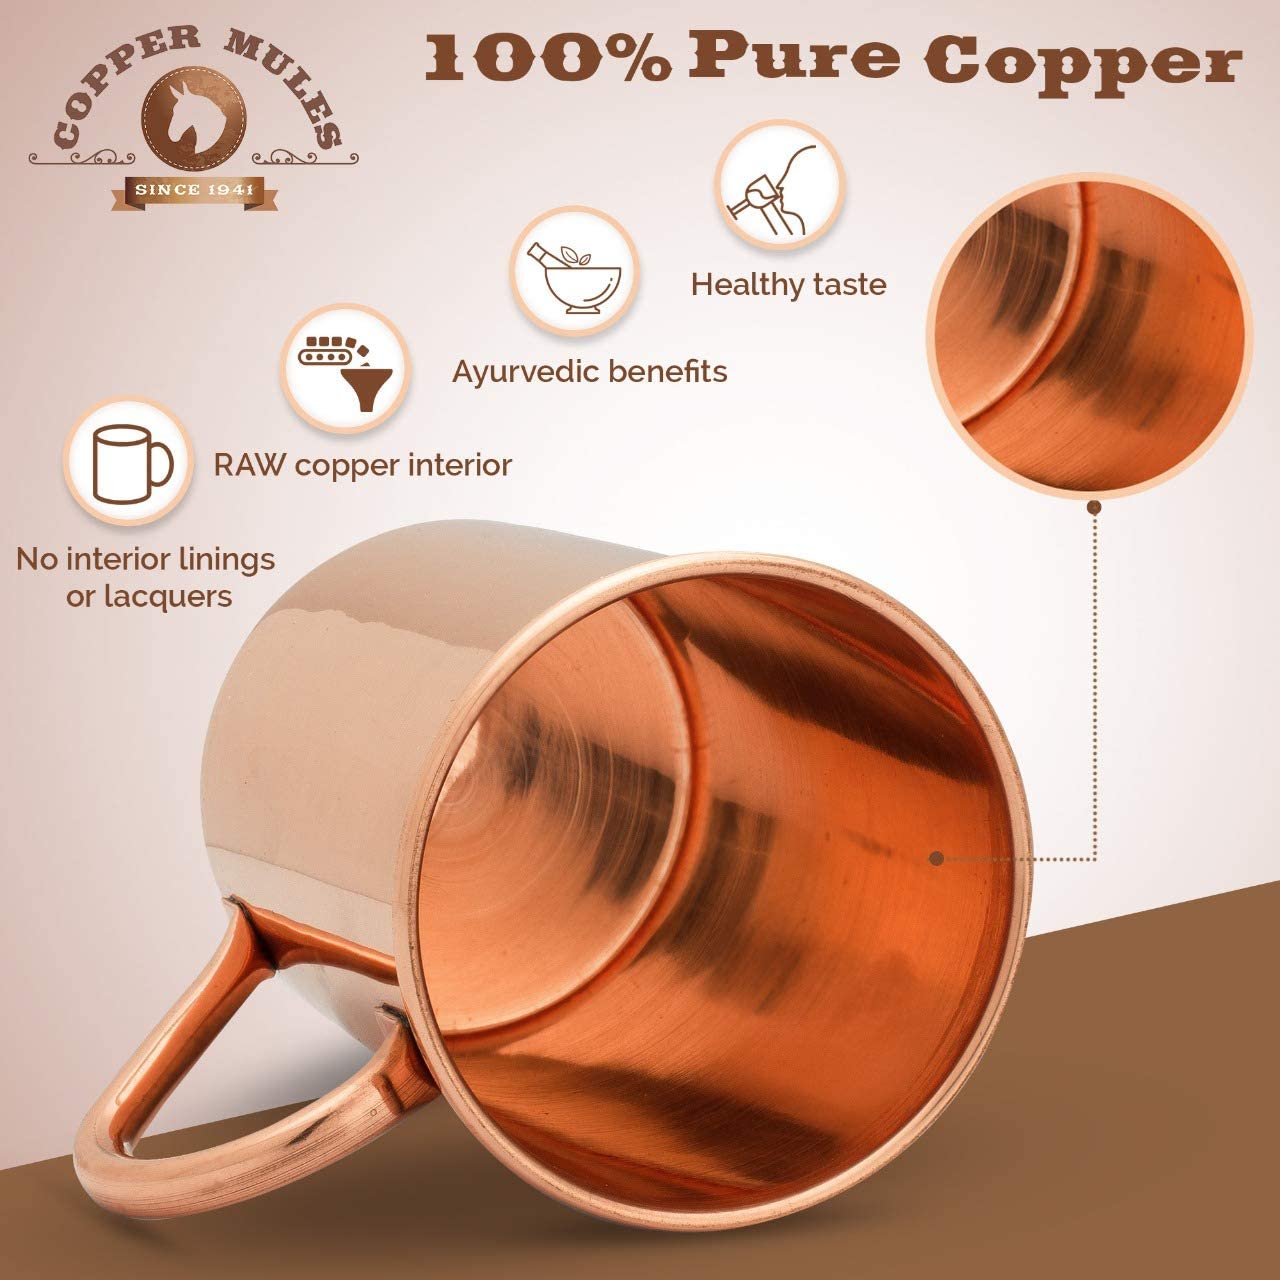 Moscow Mule PURE Copper Mugs Set of 2 by Copper Mules - Handcrafted of 100% Pure THICK Copper - Straight Smooth Finish - EasyCare Copper Interior - Strong Authentic Riveted Handle - Holds 16 ounces